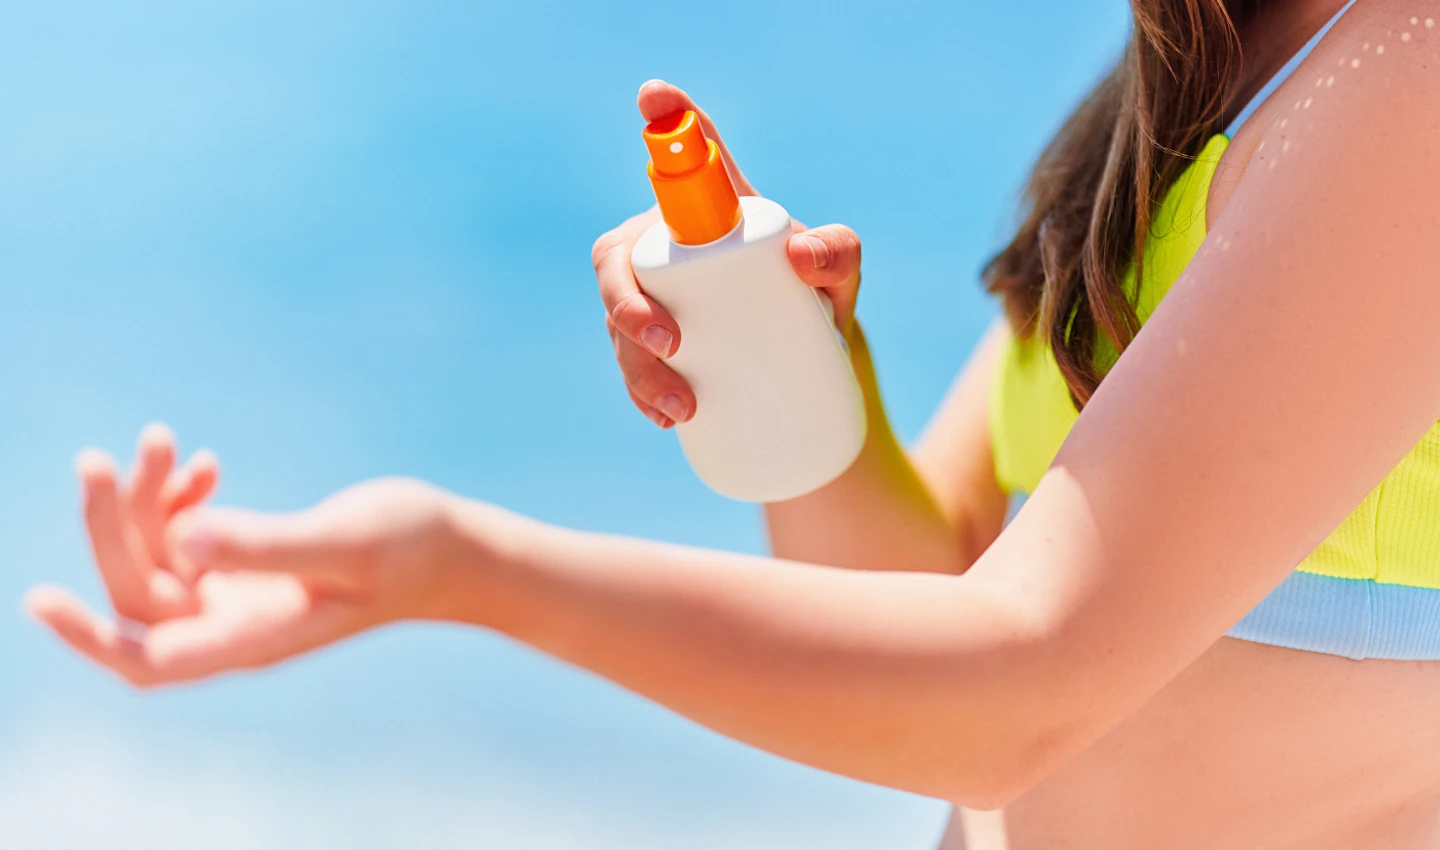 Woman applying sunscreen spray to her body for effortless sun protection.